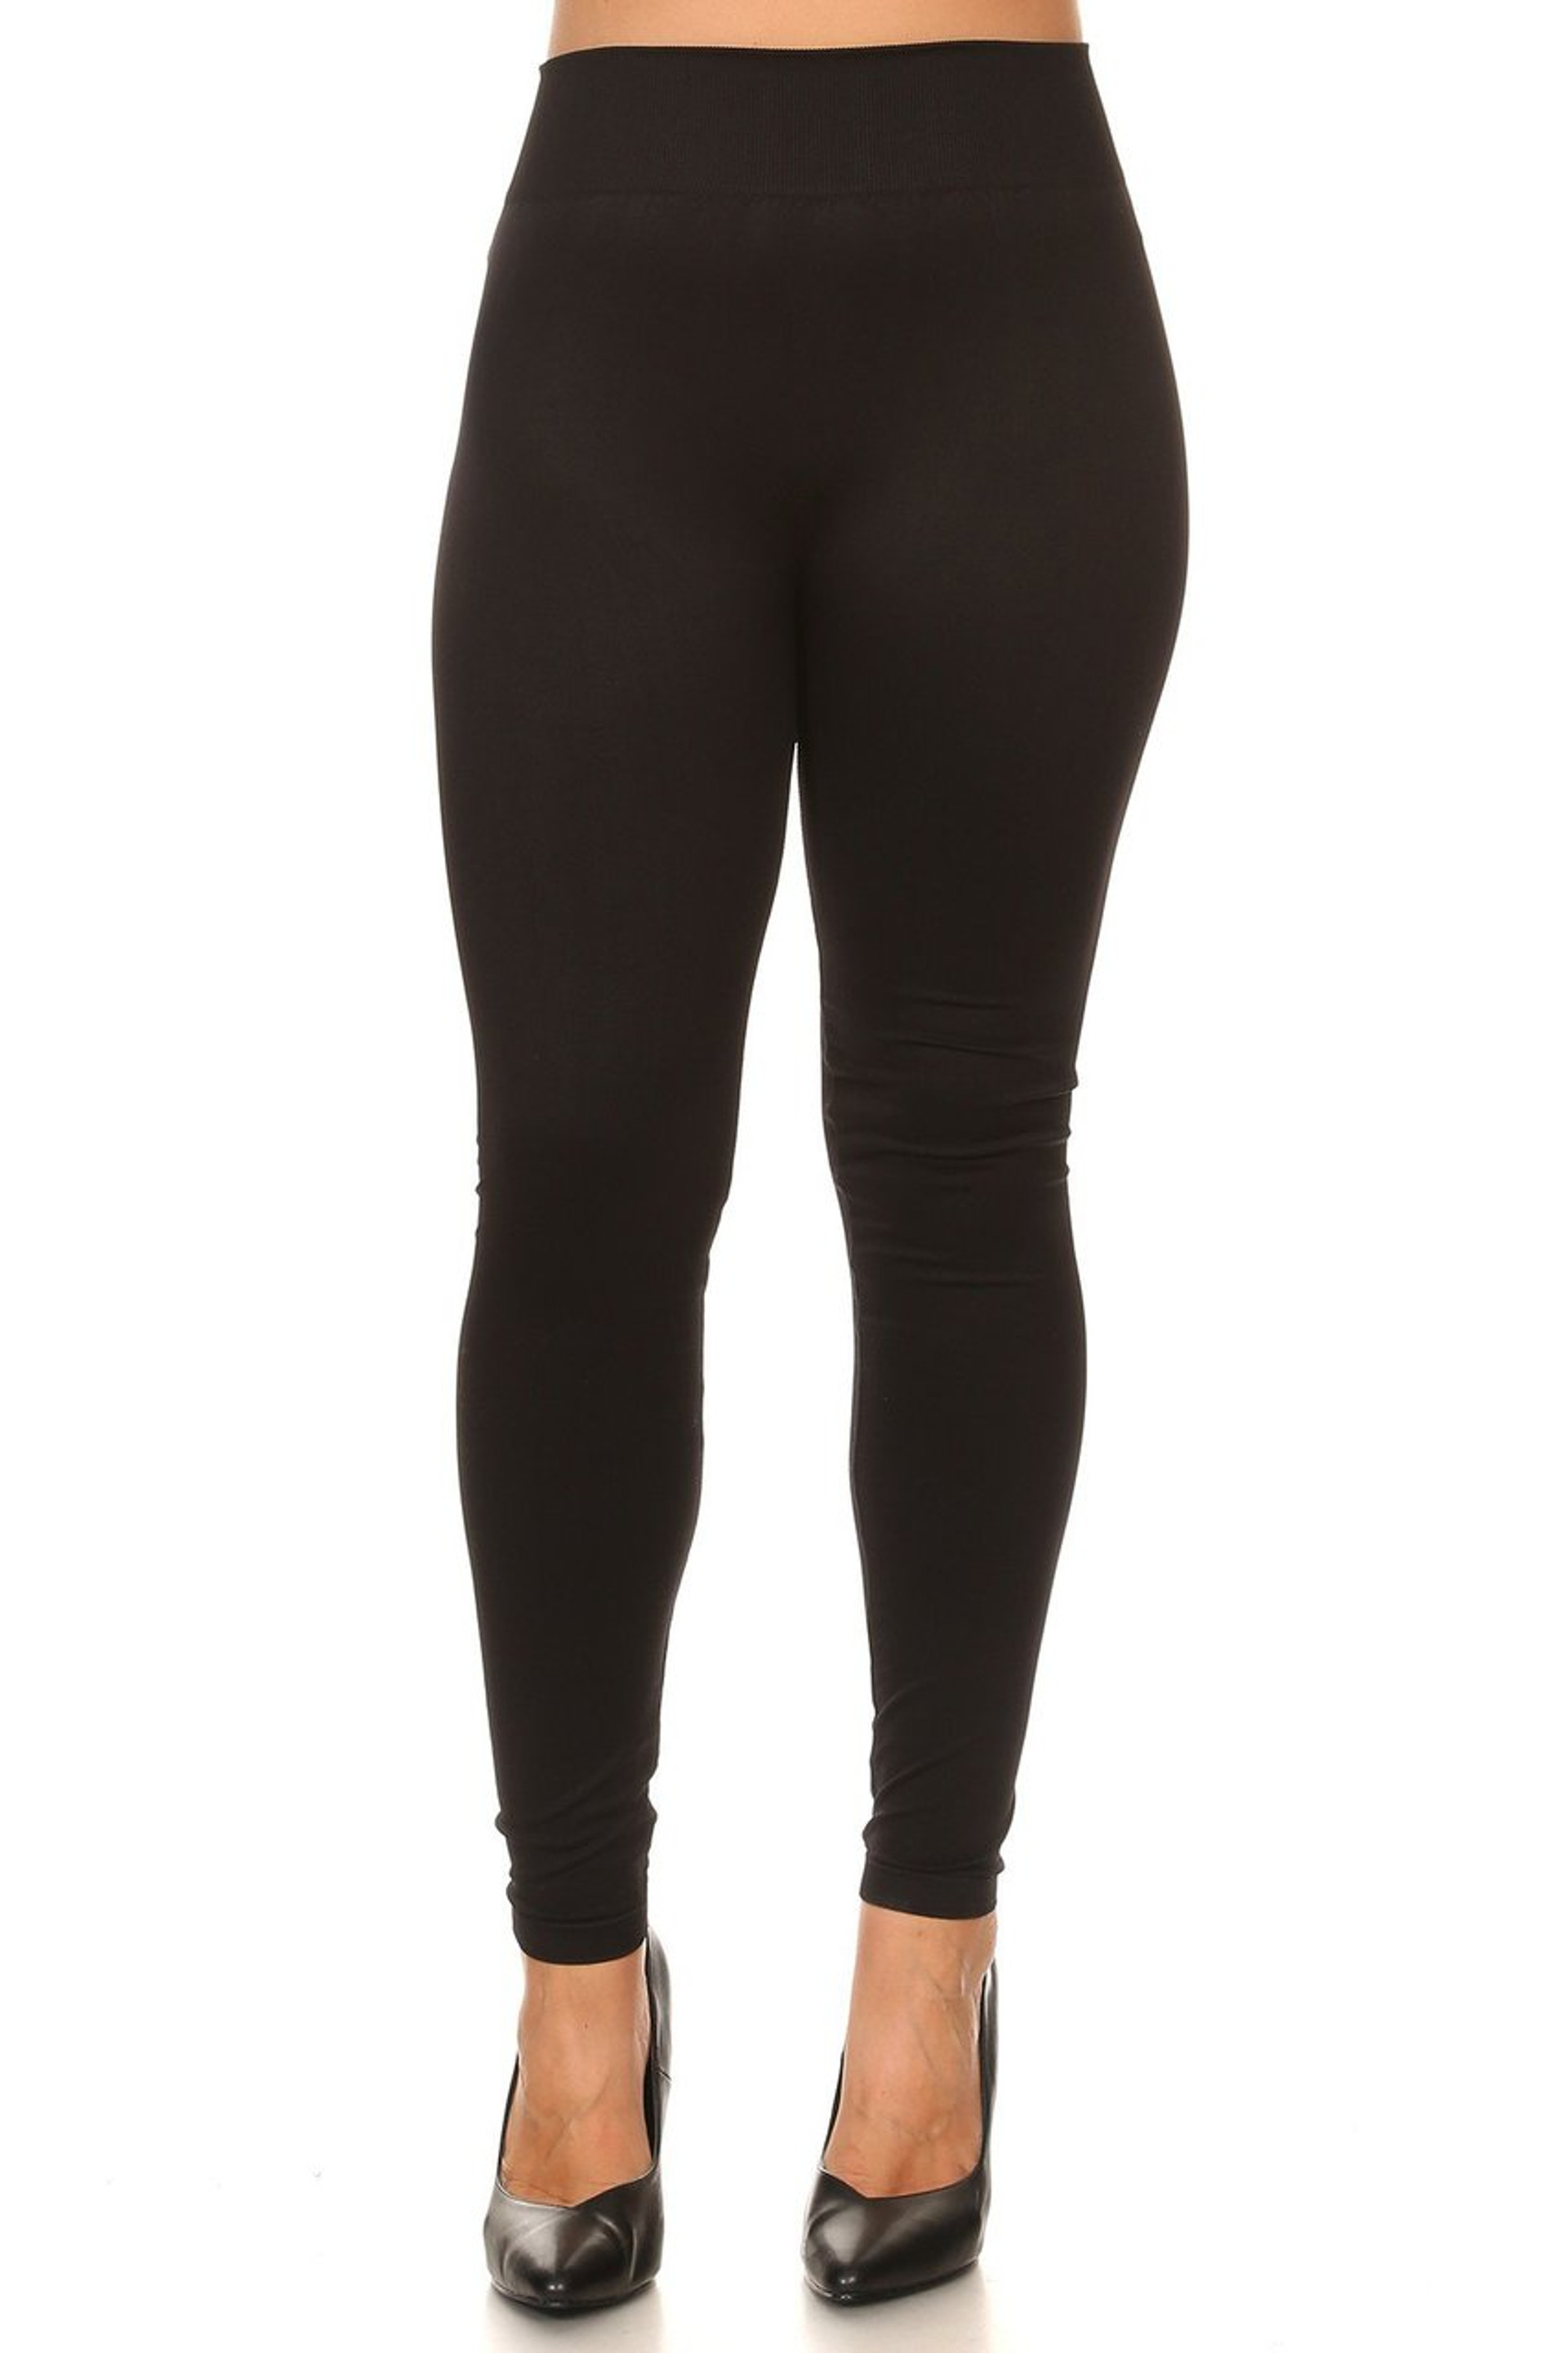 Extra Thick Basic Seamless Plus Size Leggings | Only Leggings